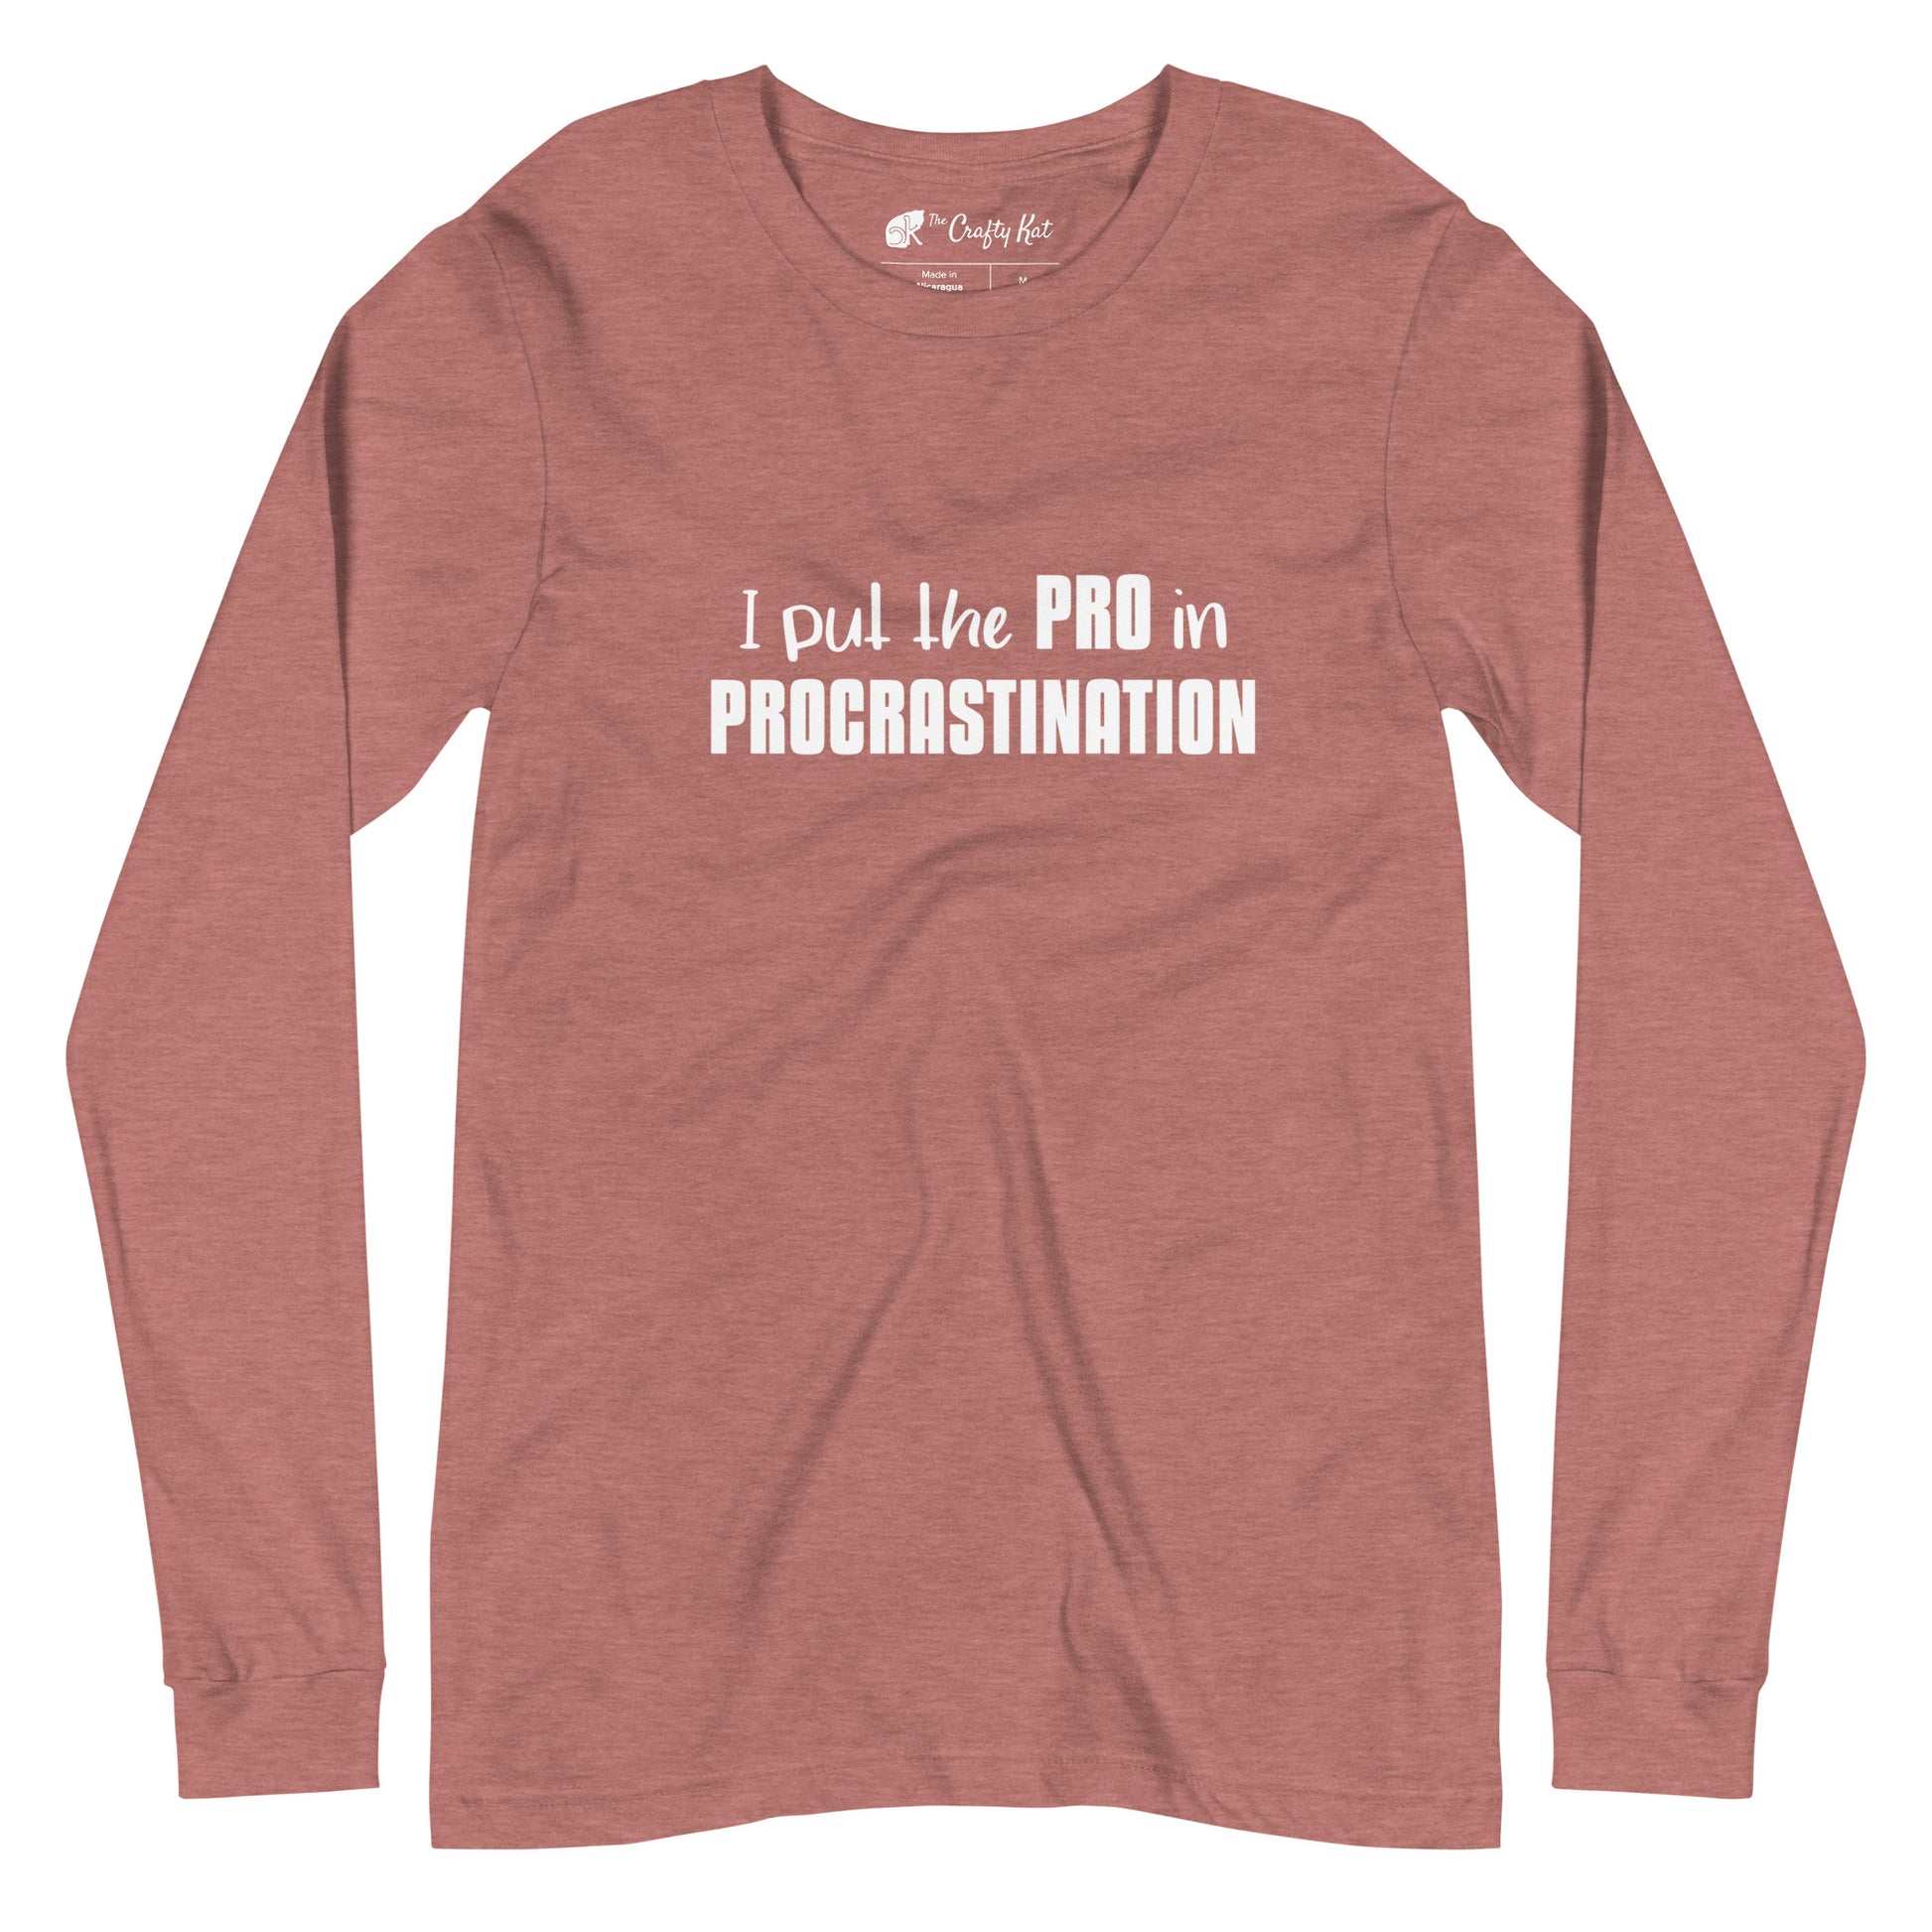 Heather Mauve long-sleeve shirt with text graphic: "I put the PRO in PROCRASTINATION"